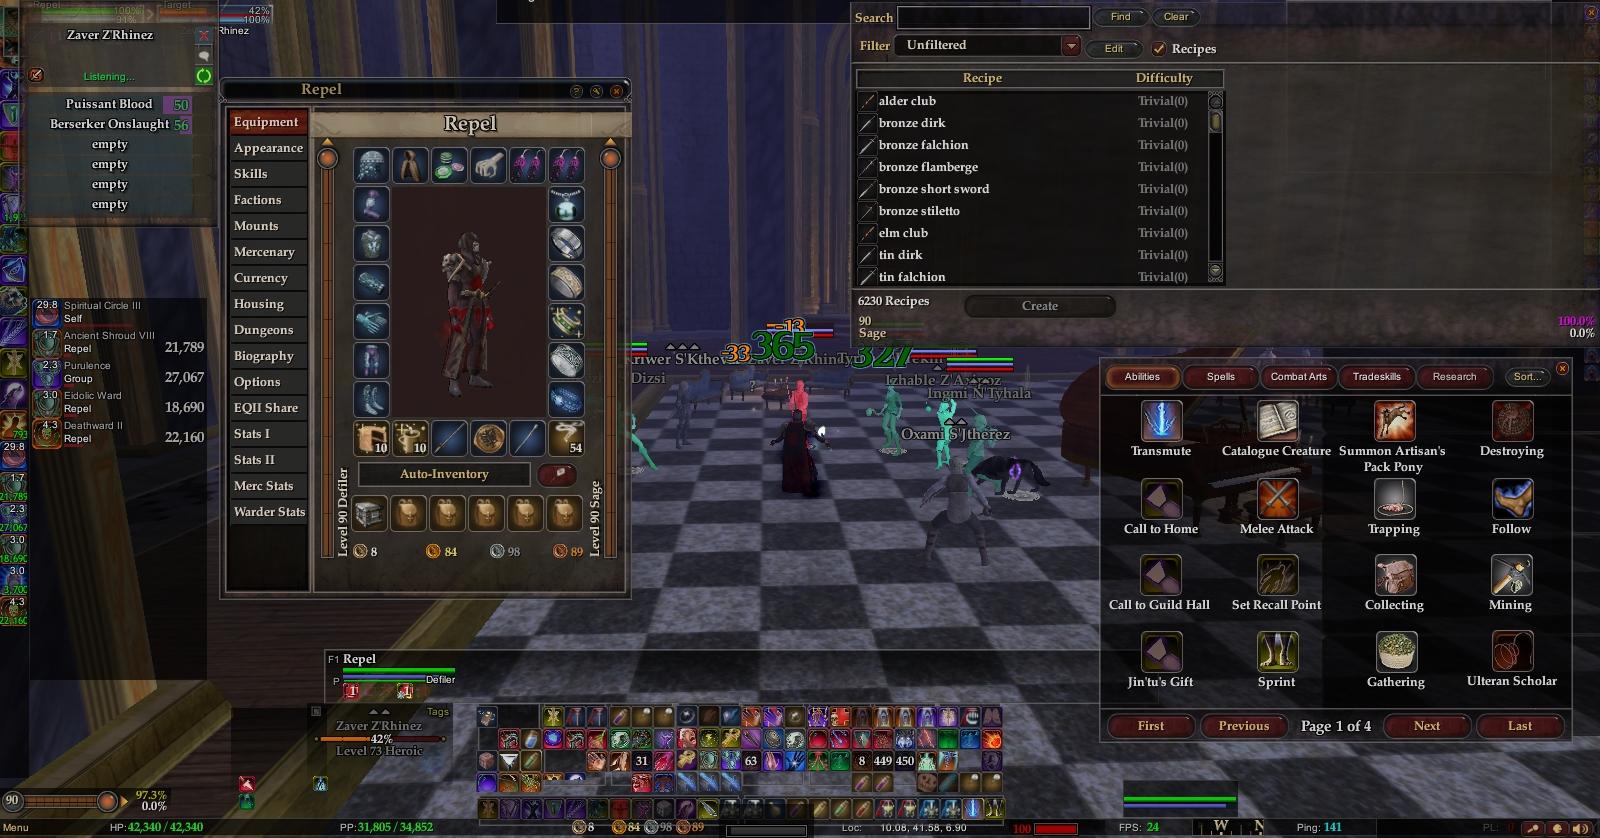 everquest 2 ui resources loading slow